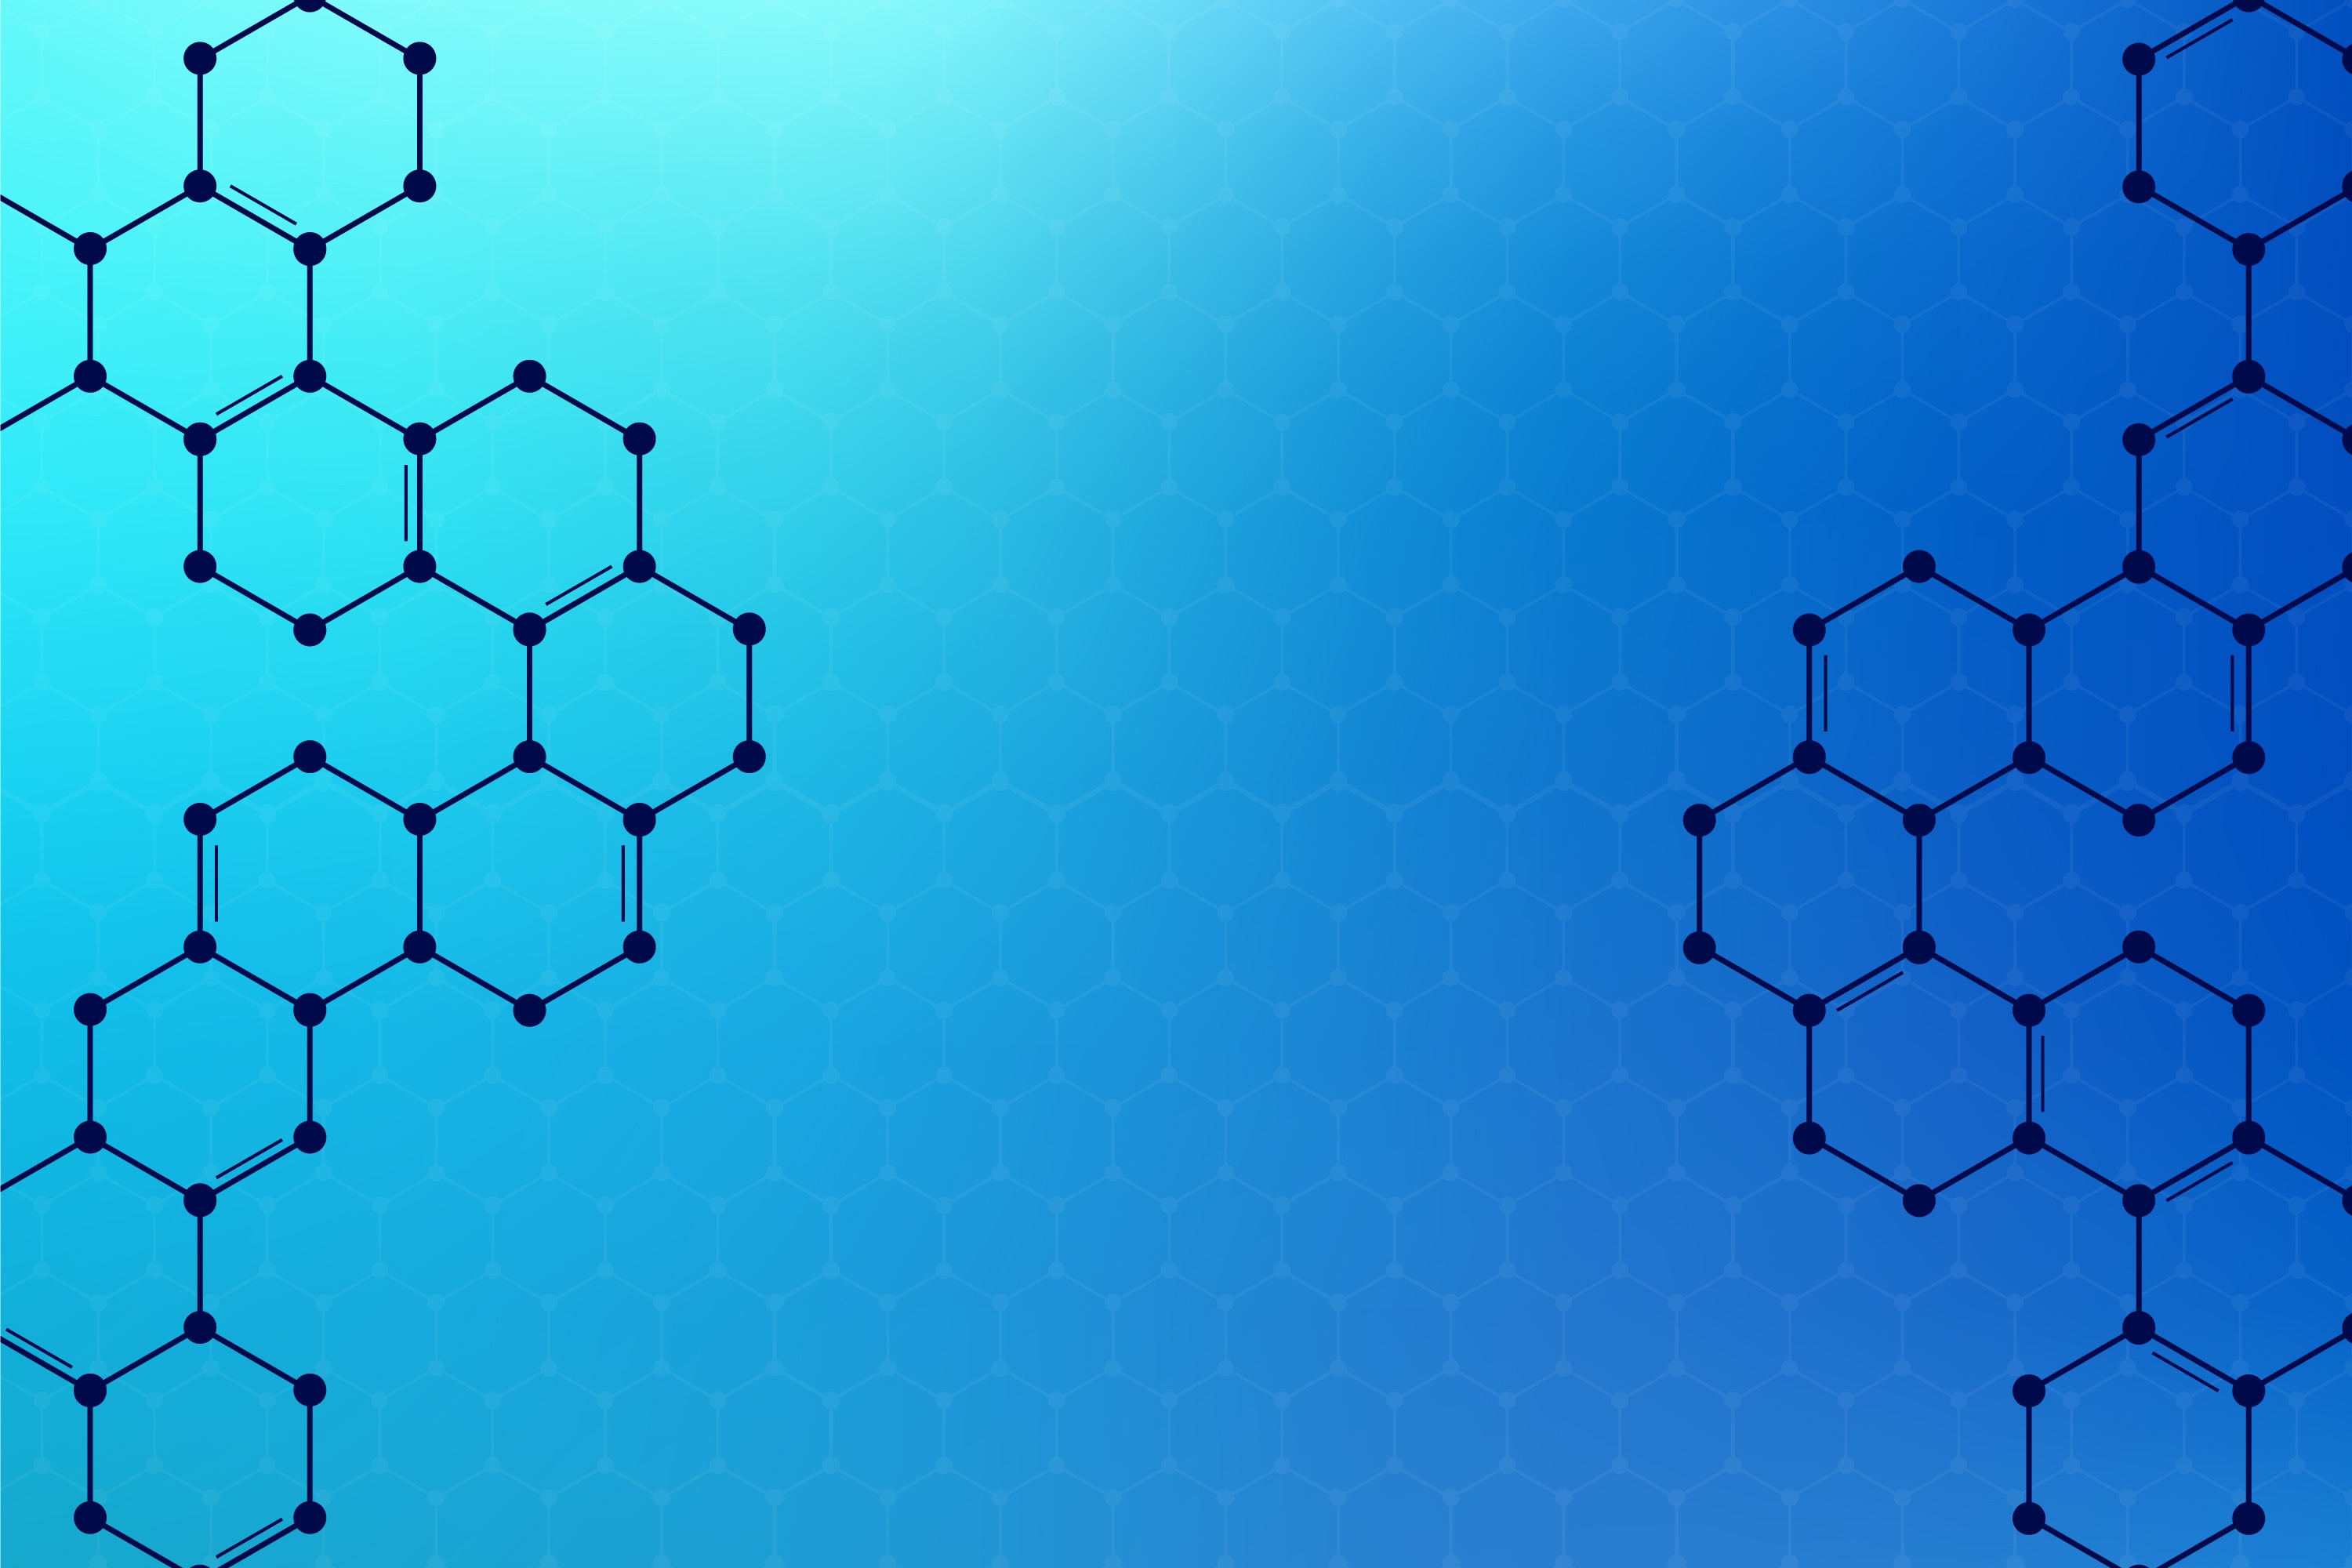 High Definition wallpaper connection, connections, hexagonals, form